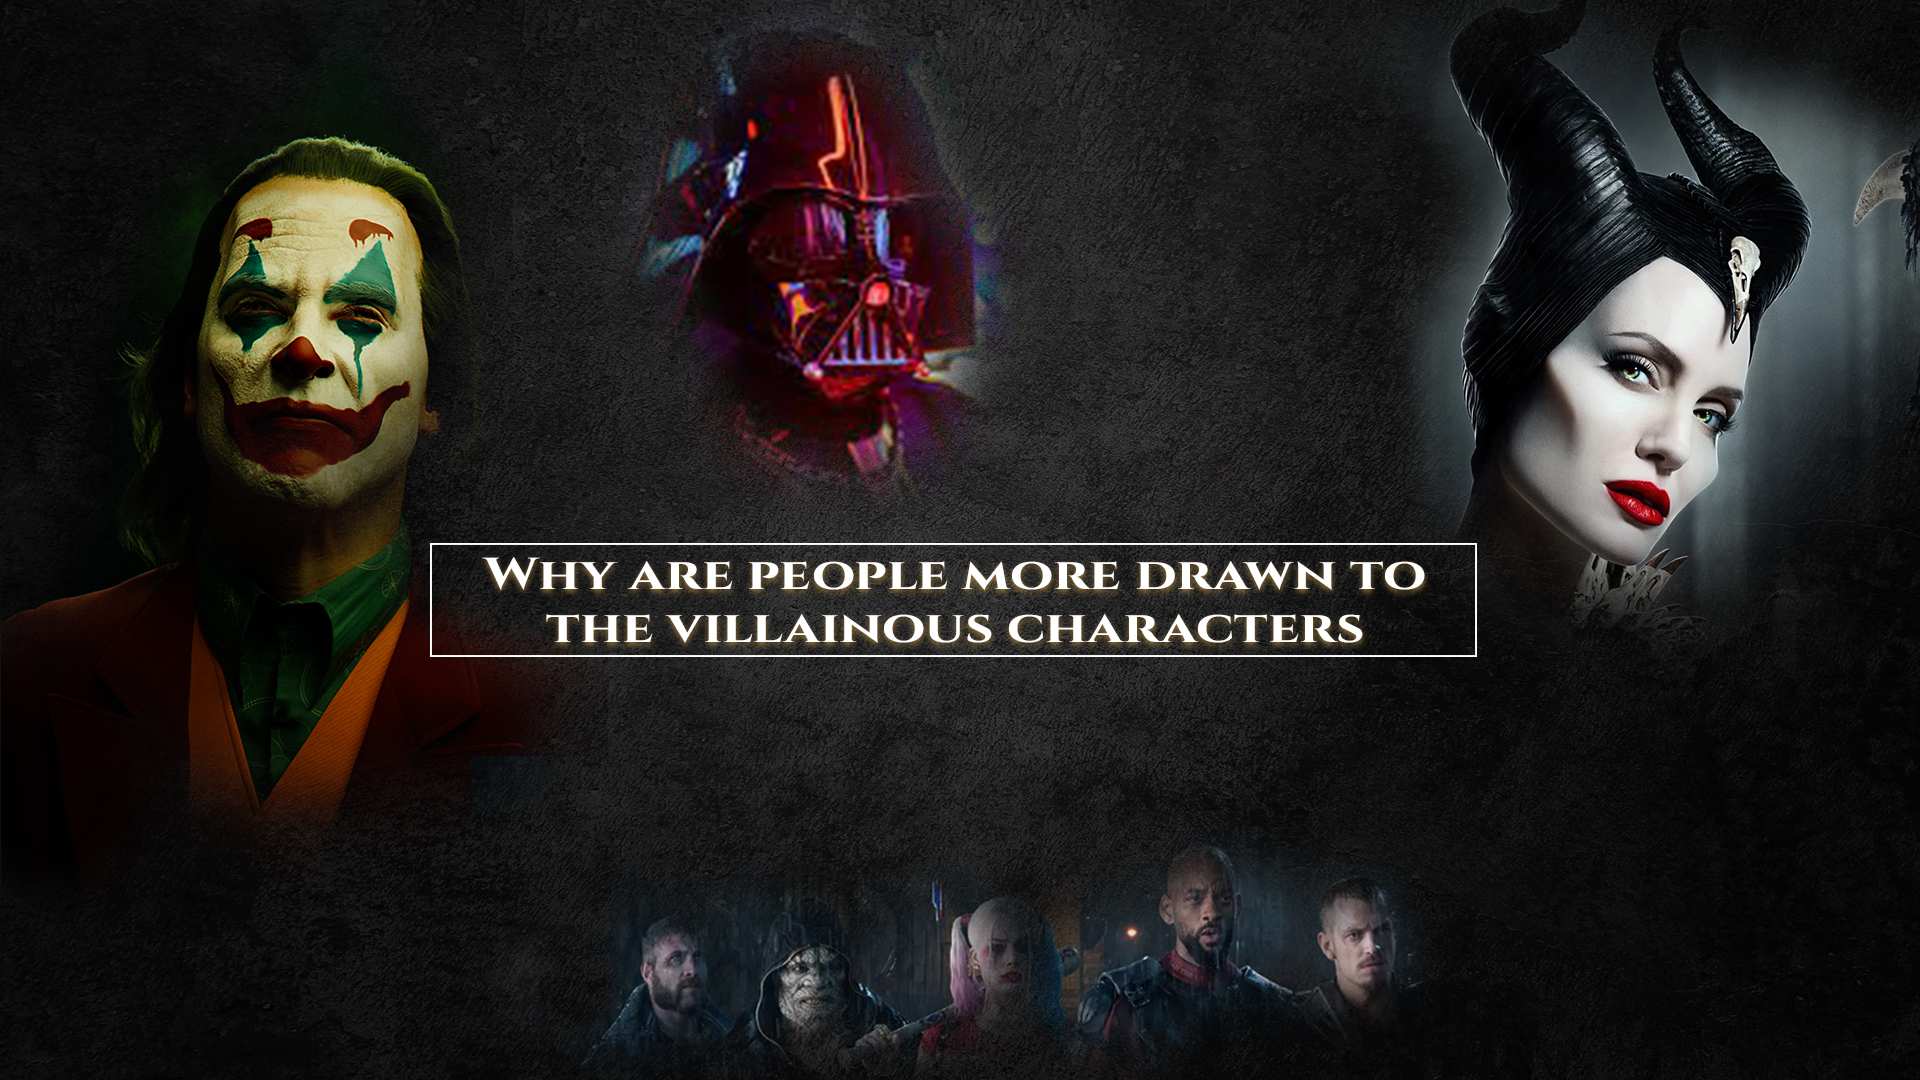 Why people are more drawn to the villainous characters?